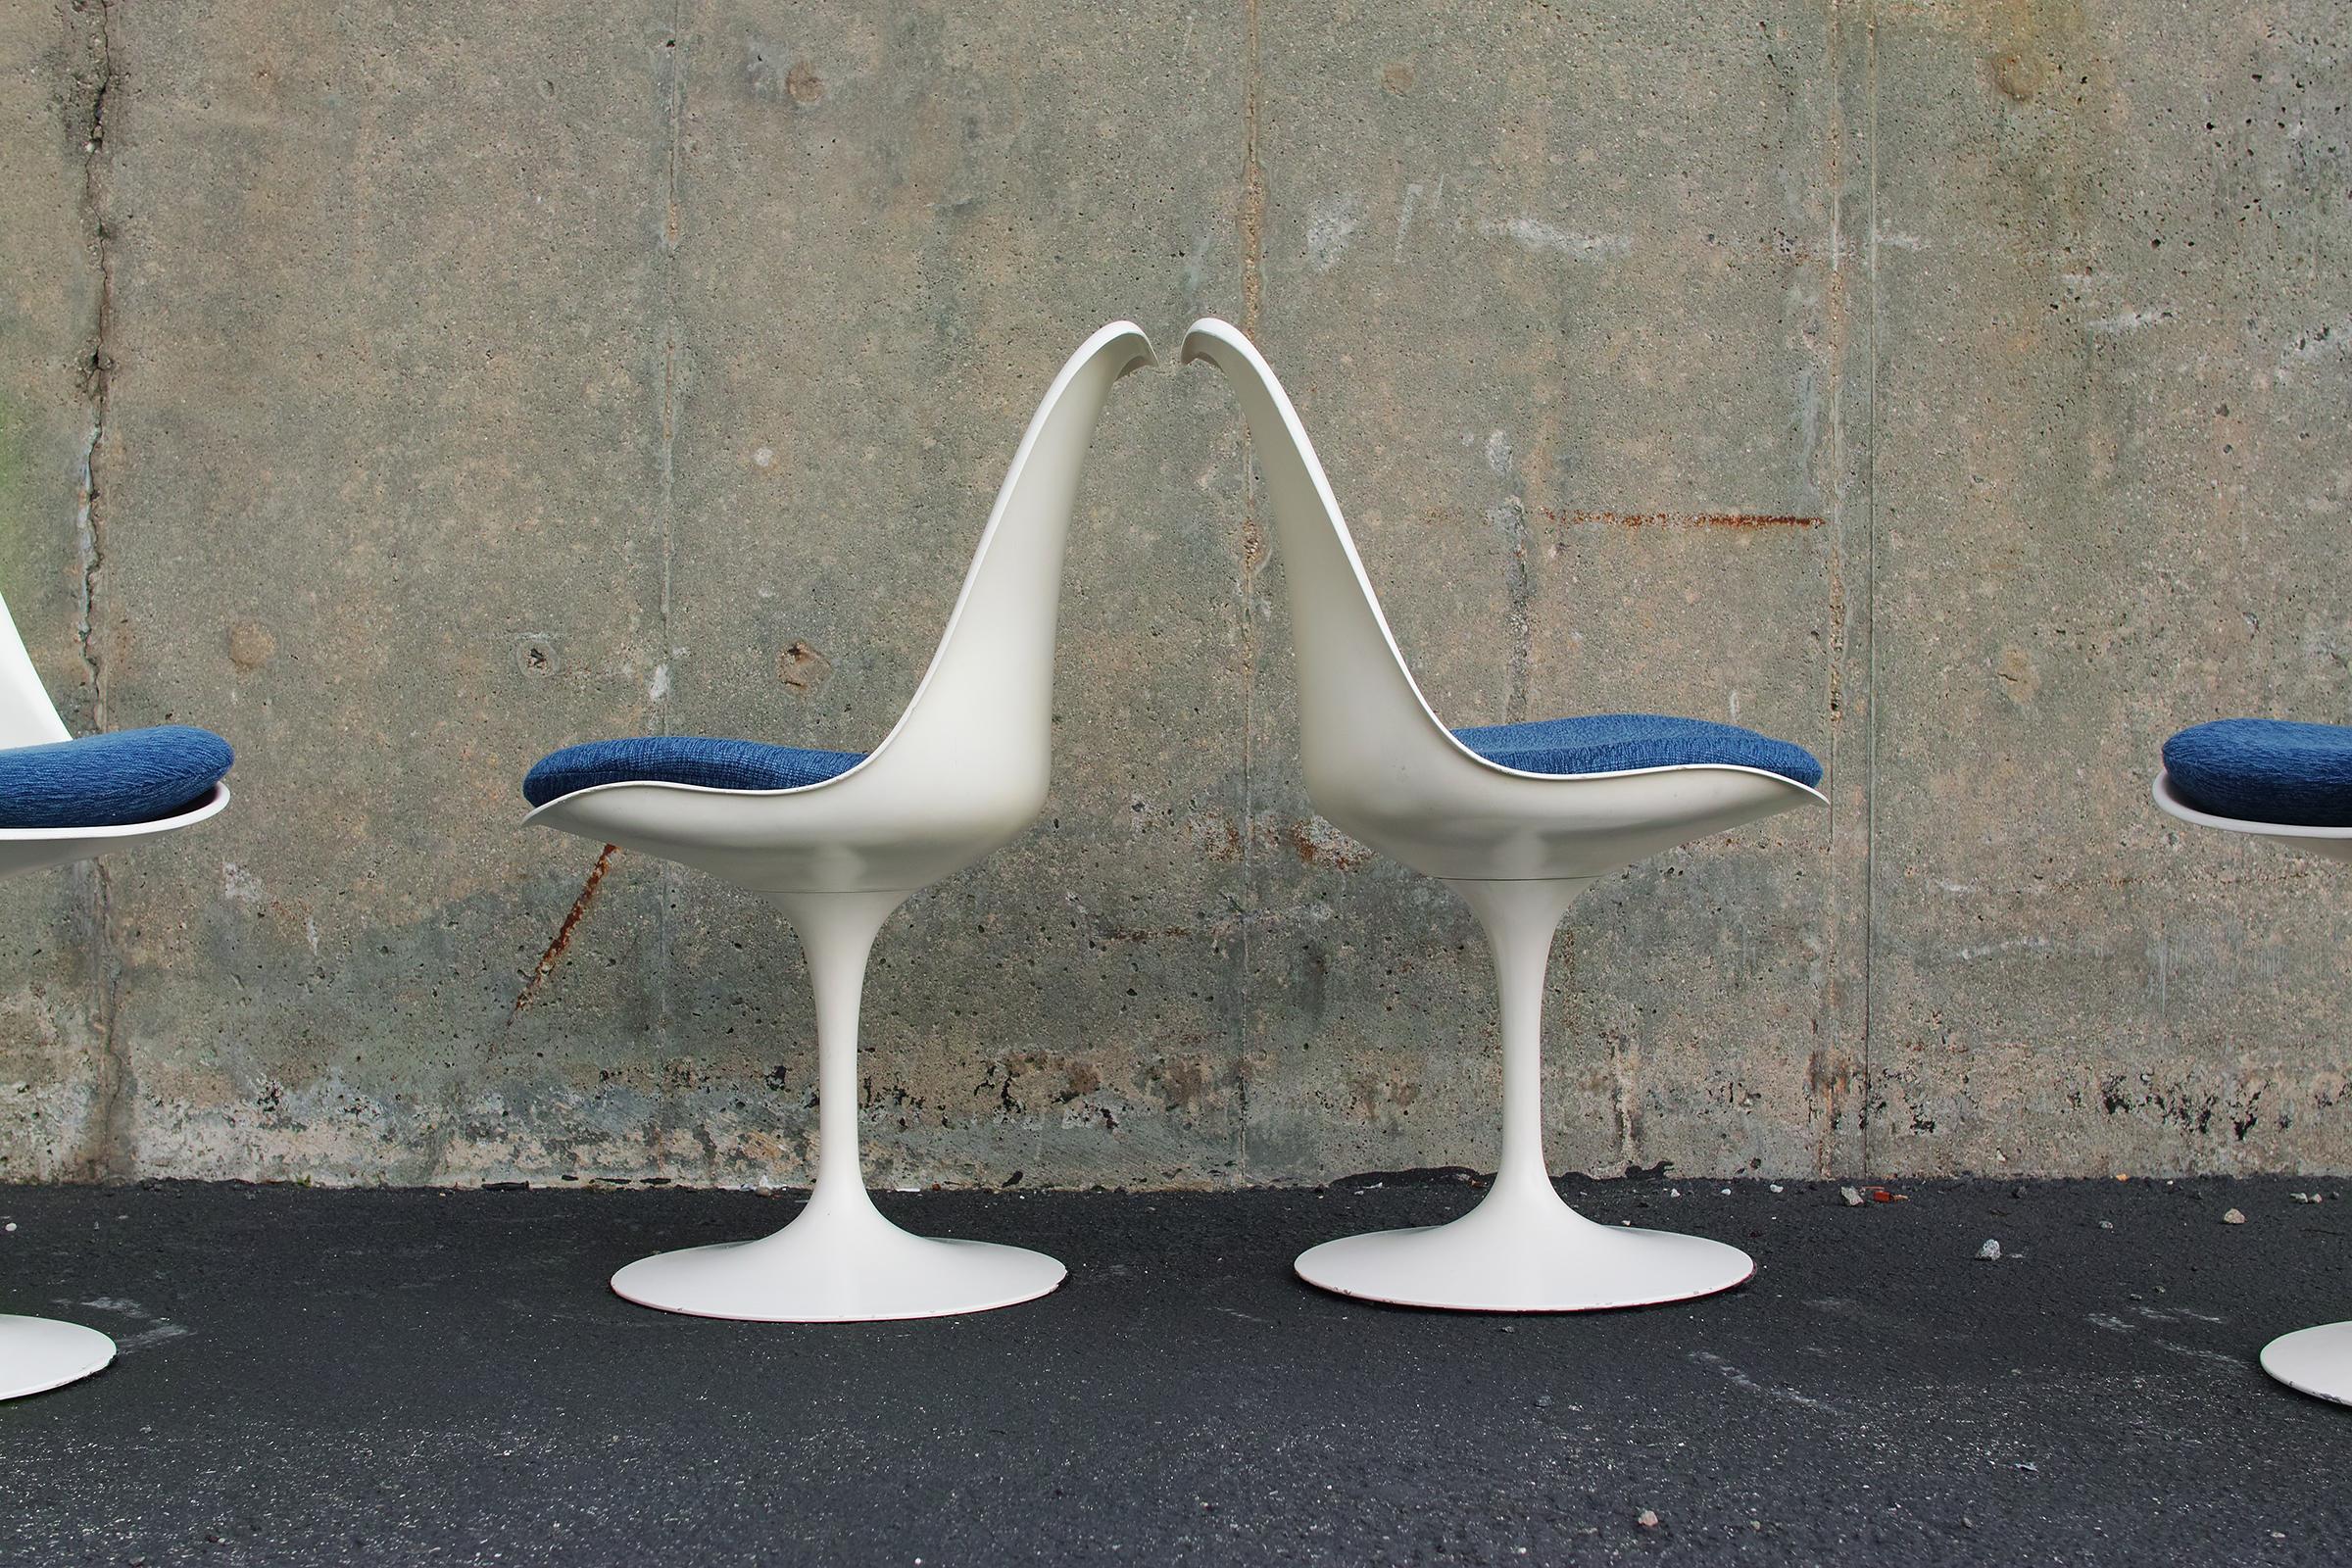 For your consideration is this authentic, very early production set of Eero Saarinen for Knoll Tulip Chairs, signed and dated 1960. The chairs feature upholstered blue wool blend seat pads, original soft white finish, lightweight yet sturdy